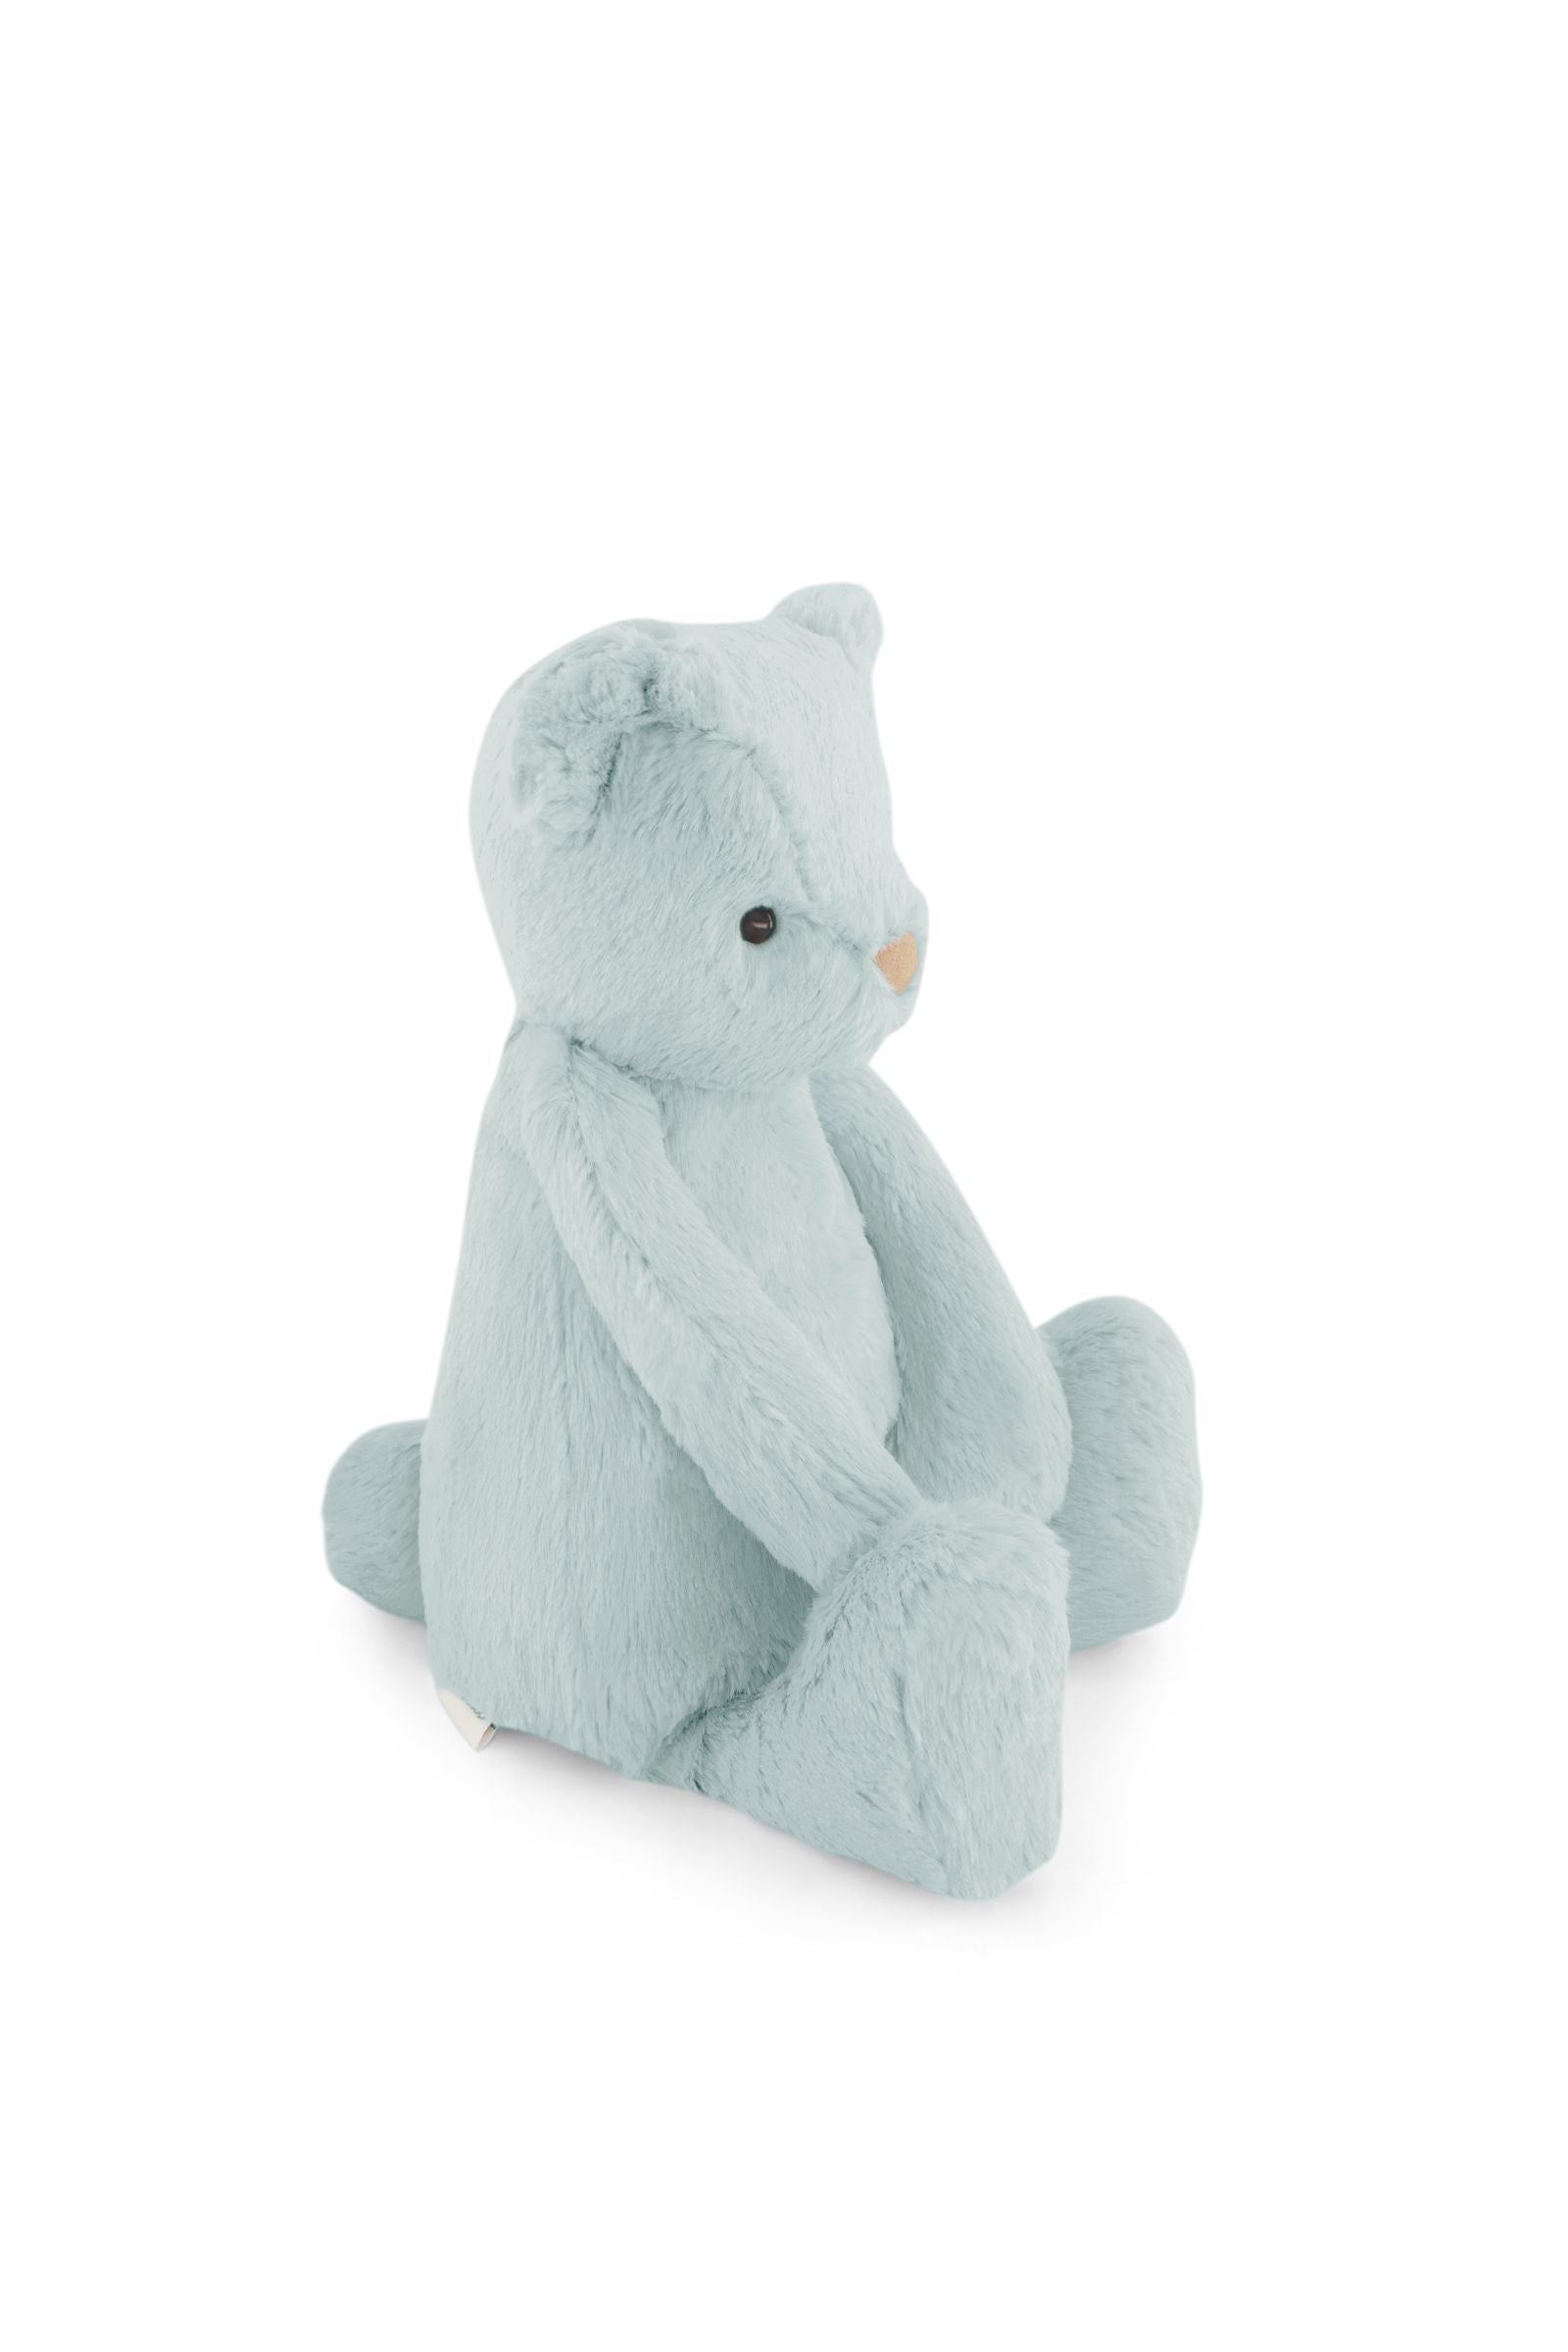 Snuggle Bunnies - George the Bear - Sprout 30cm-Toys-Jamie Kay-The Bay Room